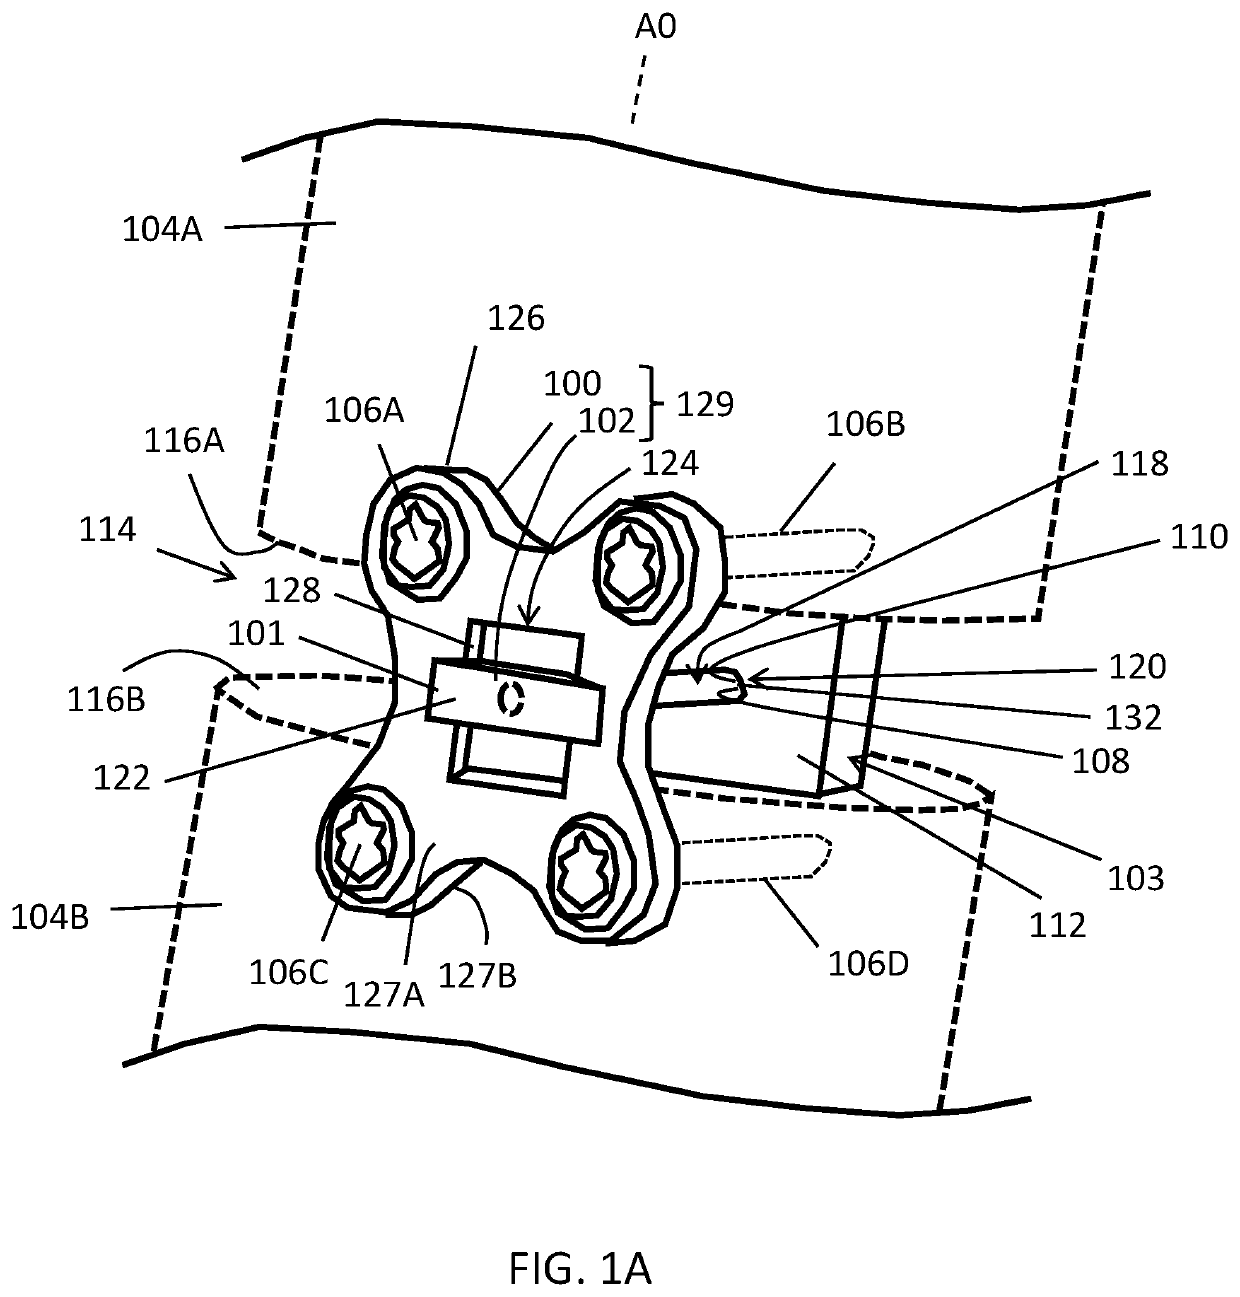 Placement jigs for osteosynthesis systems and related methods